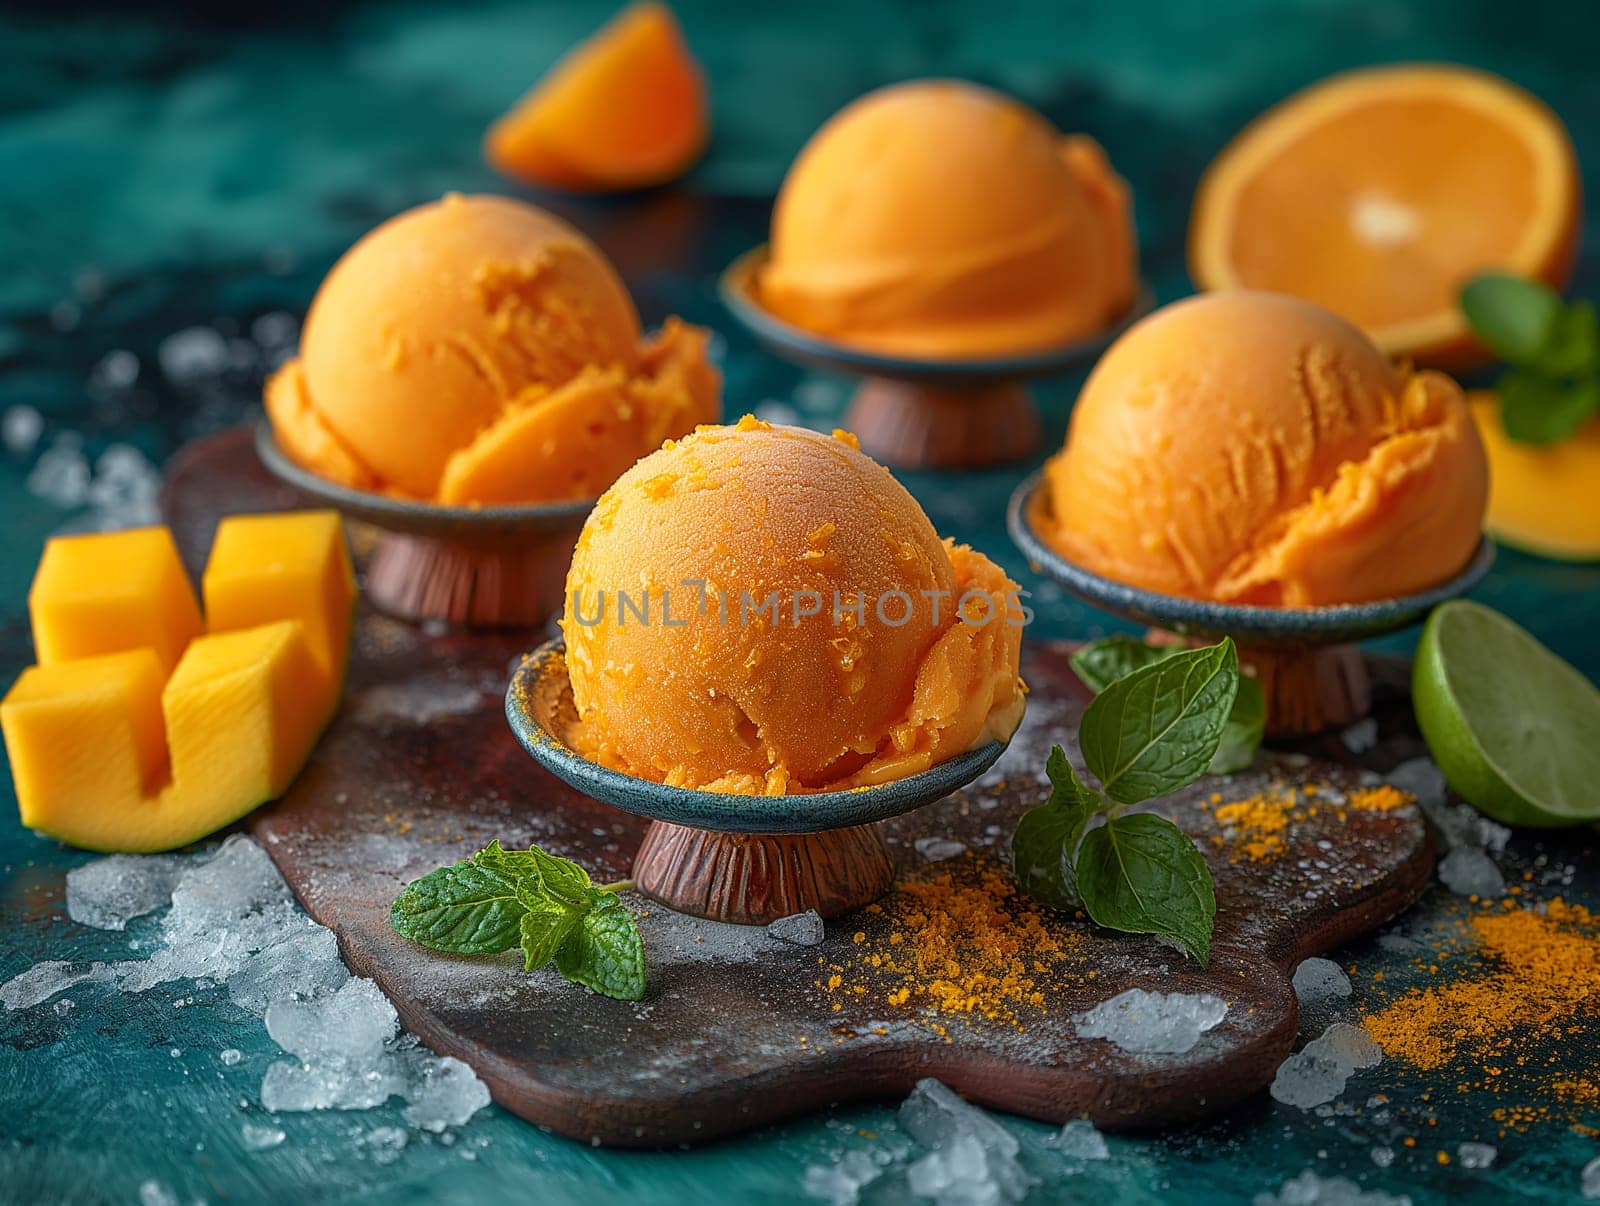 Scoops of vibrant orange sorbet garnished with mint, accompanied by orange slices and mango chunks. by Hype2art